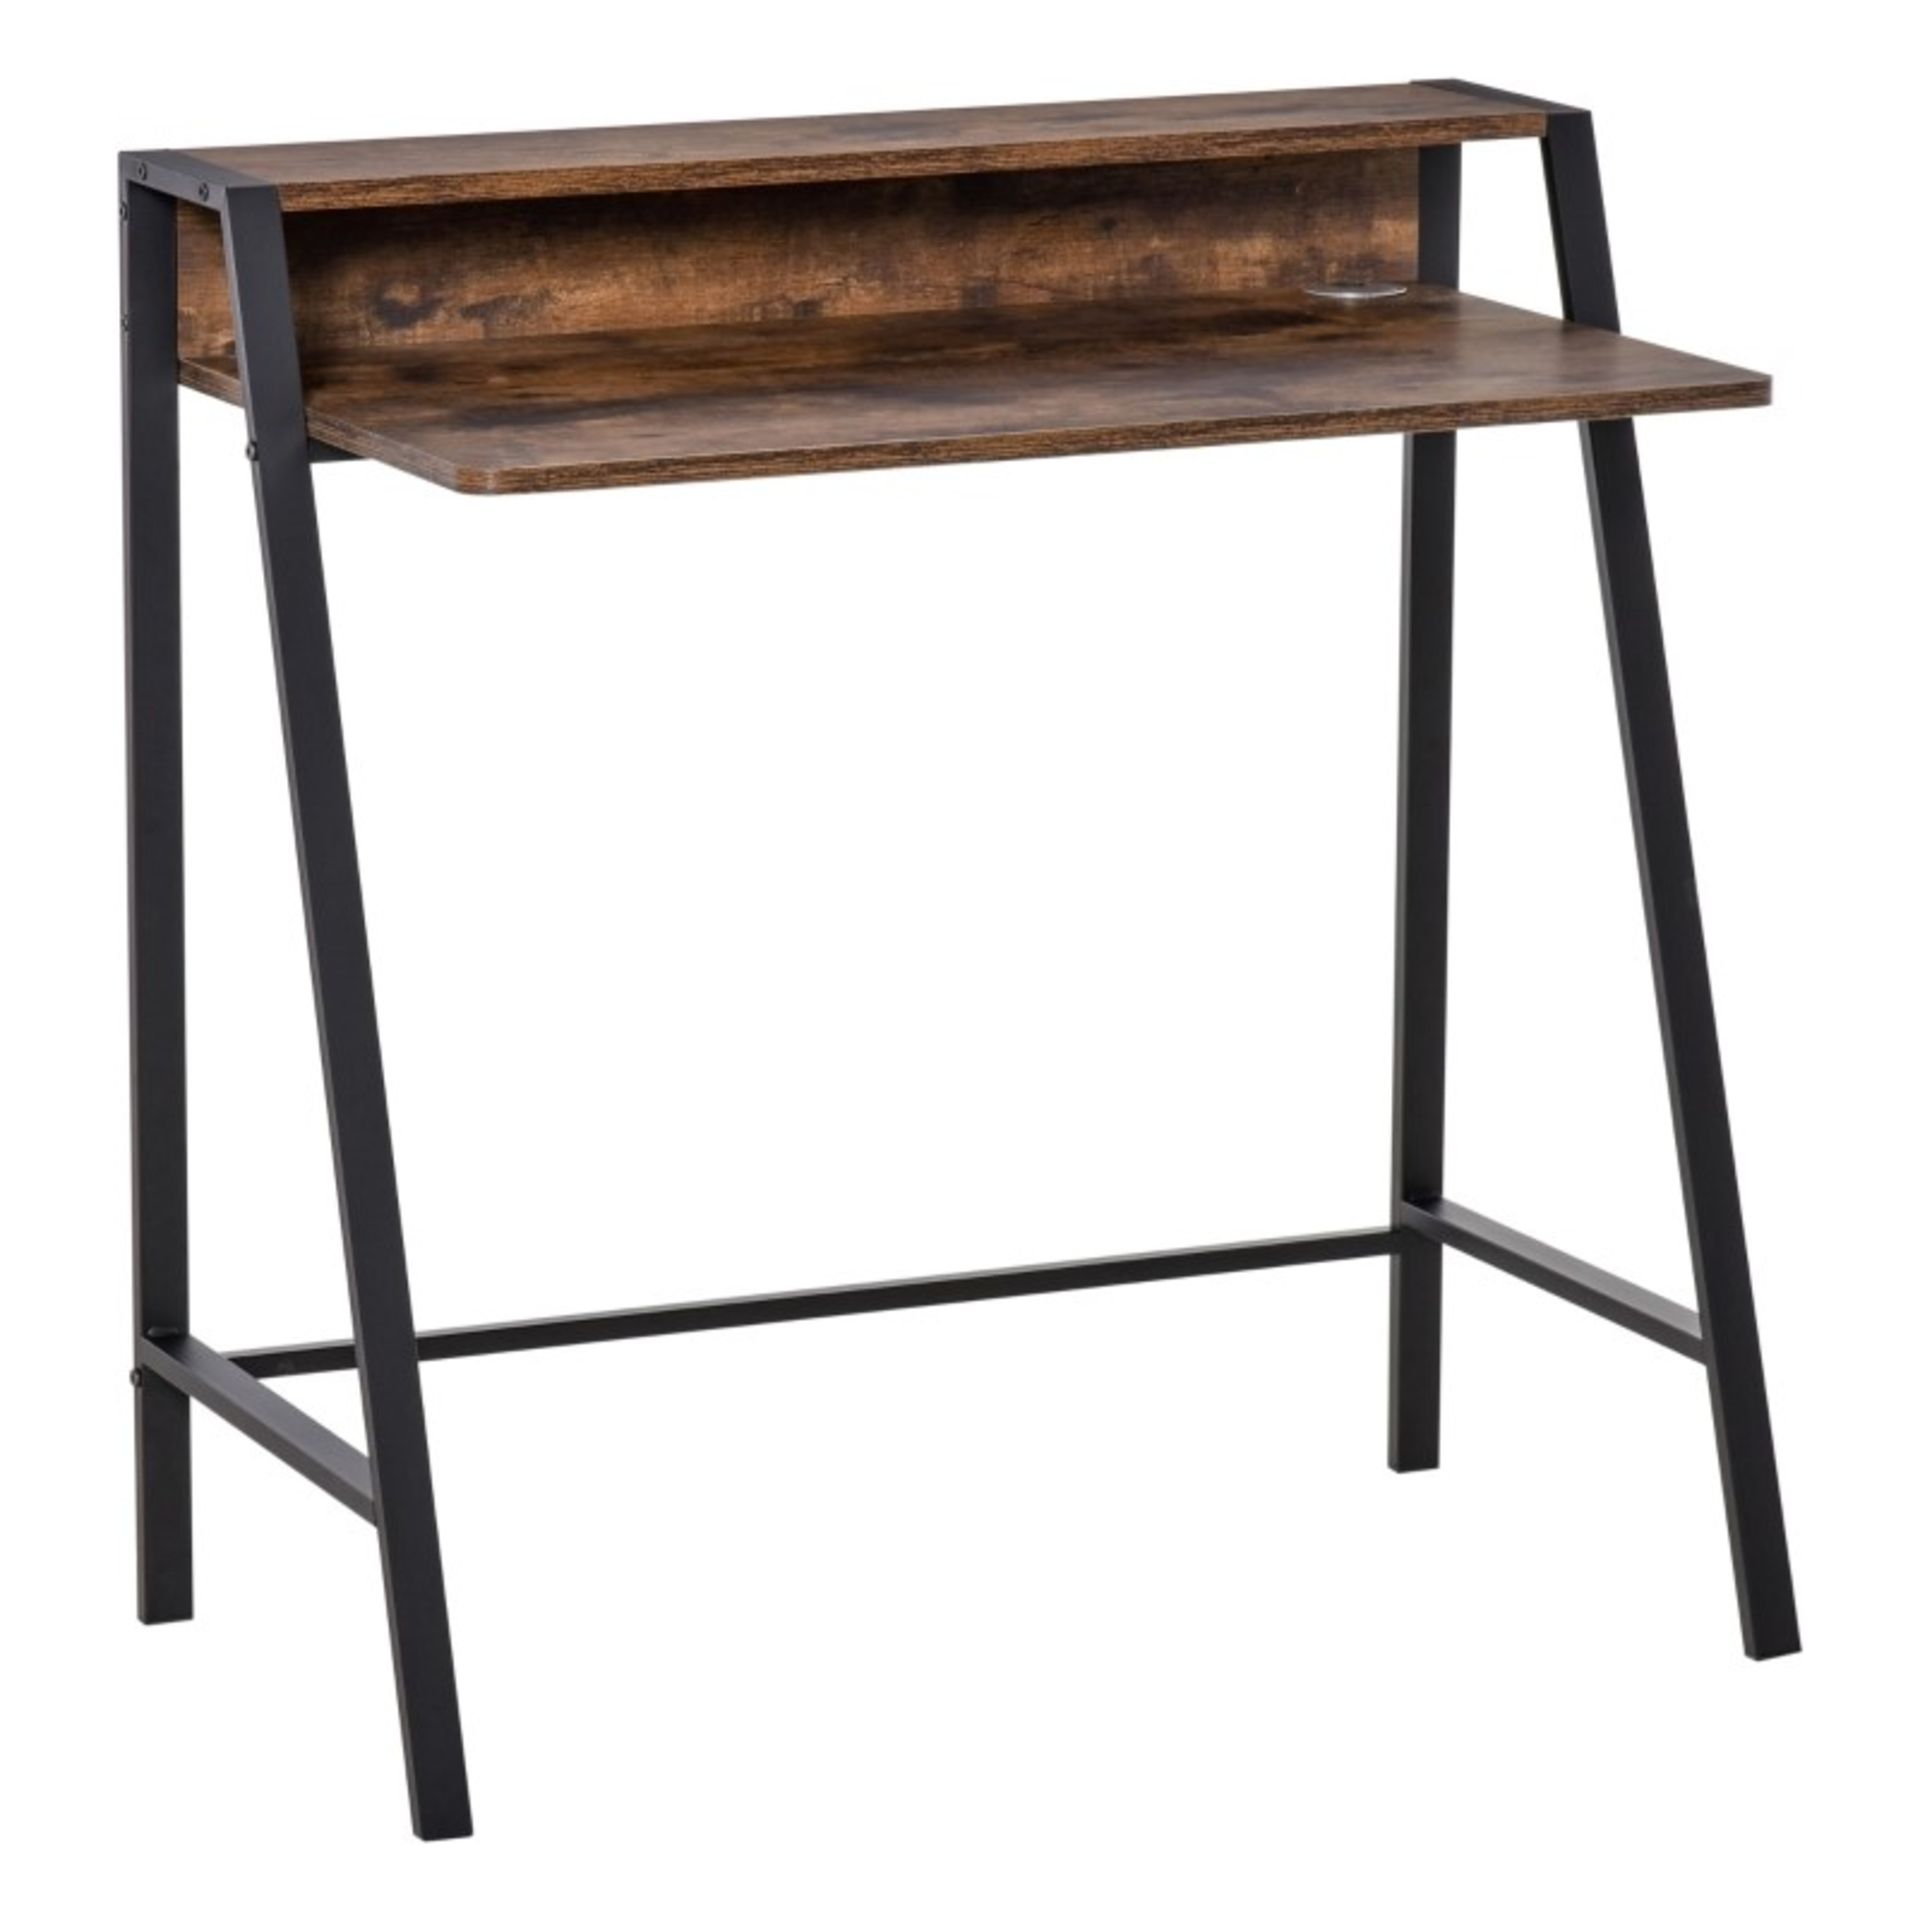 RRP £61.99 - Industrial-Style Open Writing Desk, with Top Shelf - Brown - 85H x 84L x 45Wcm. Top